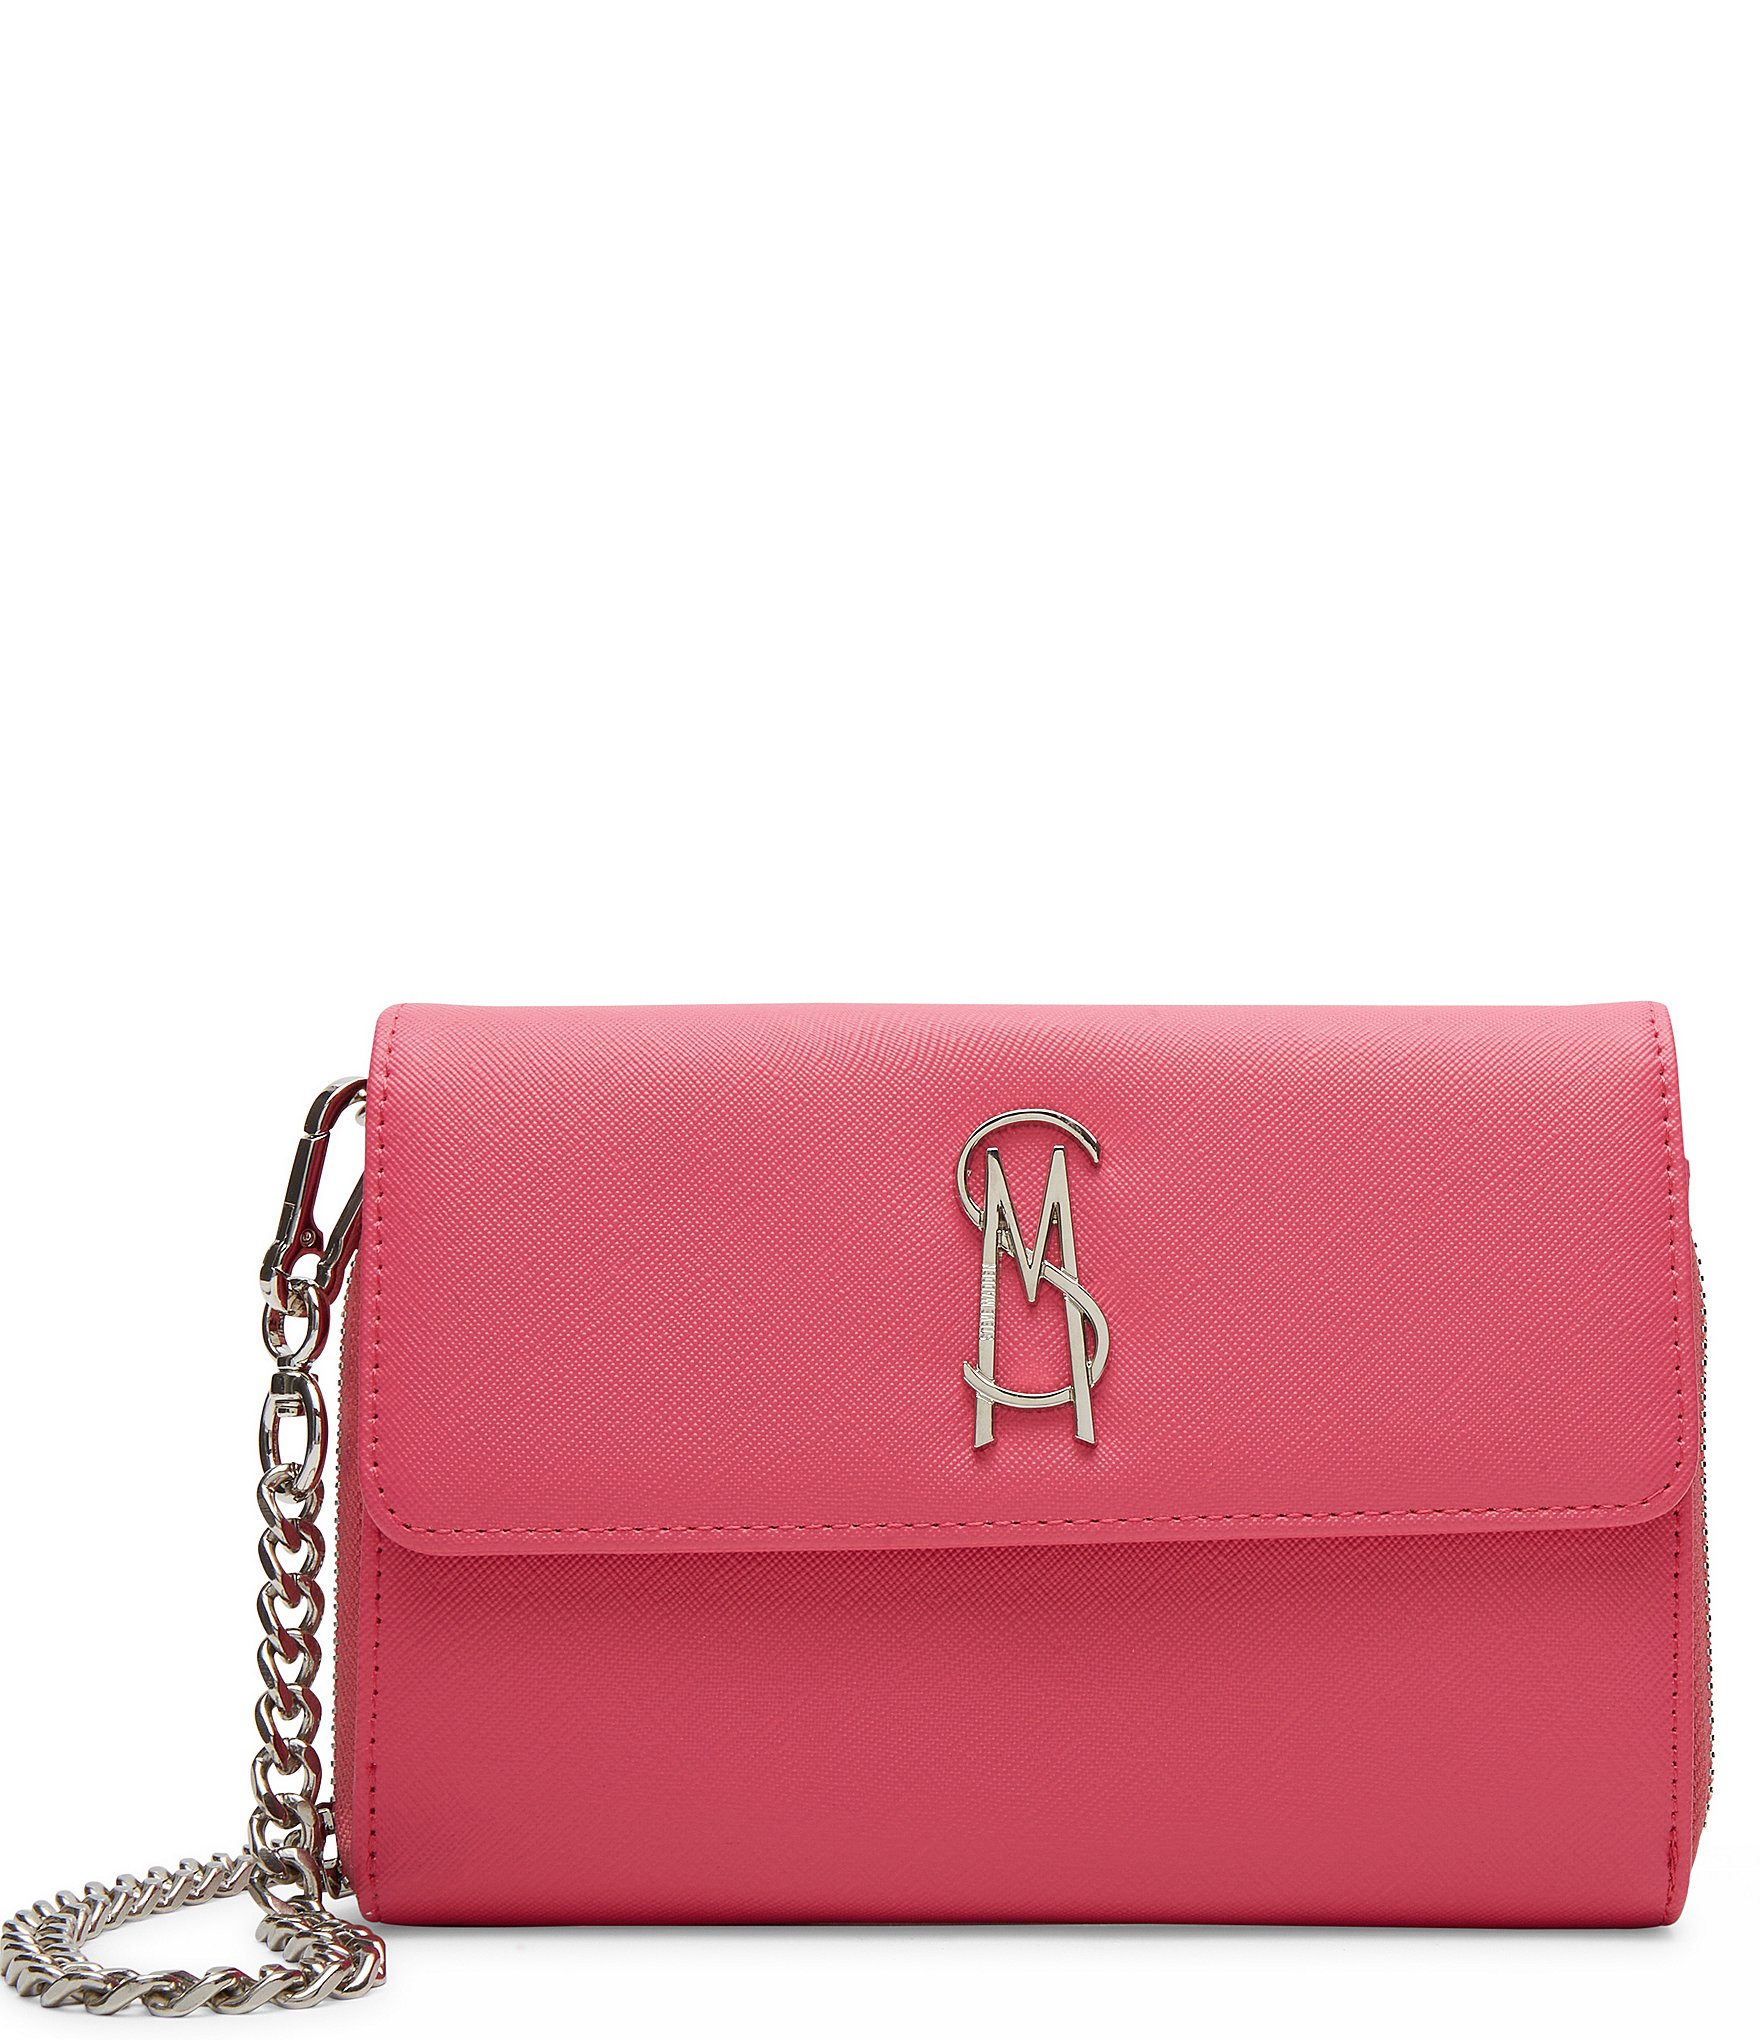 BURBERRY TB Chain mini wallet Shoulder Bag Crossbody Leather pink